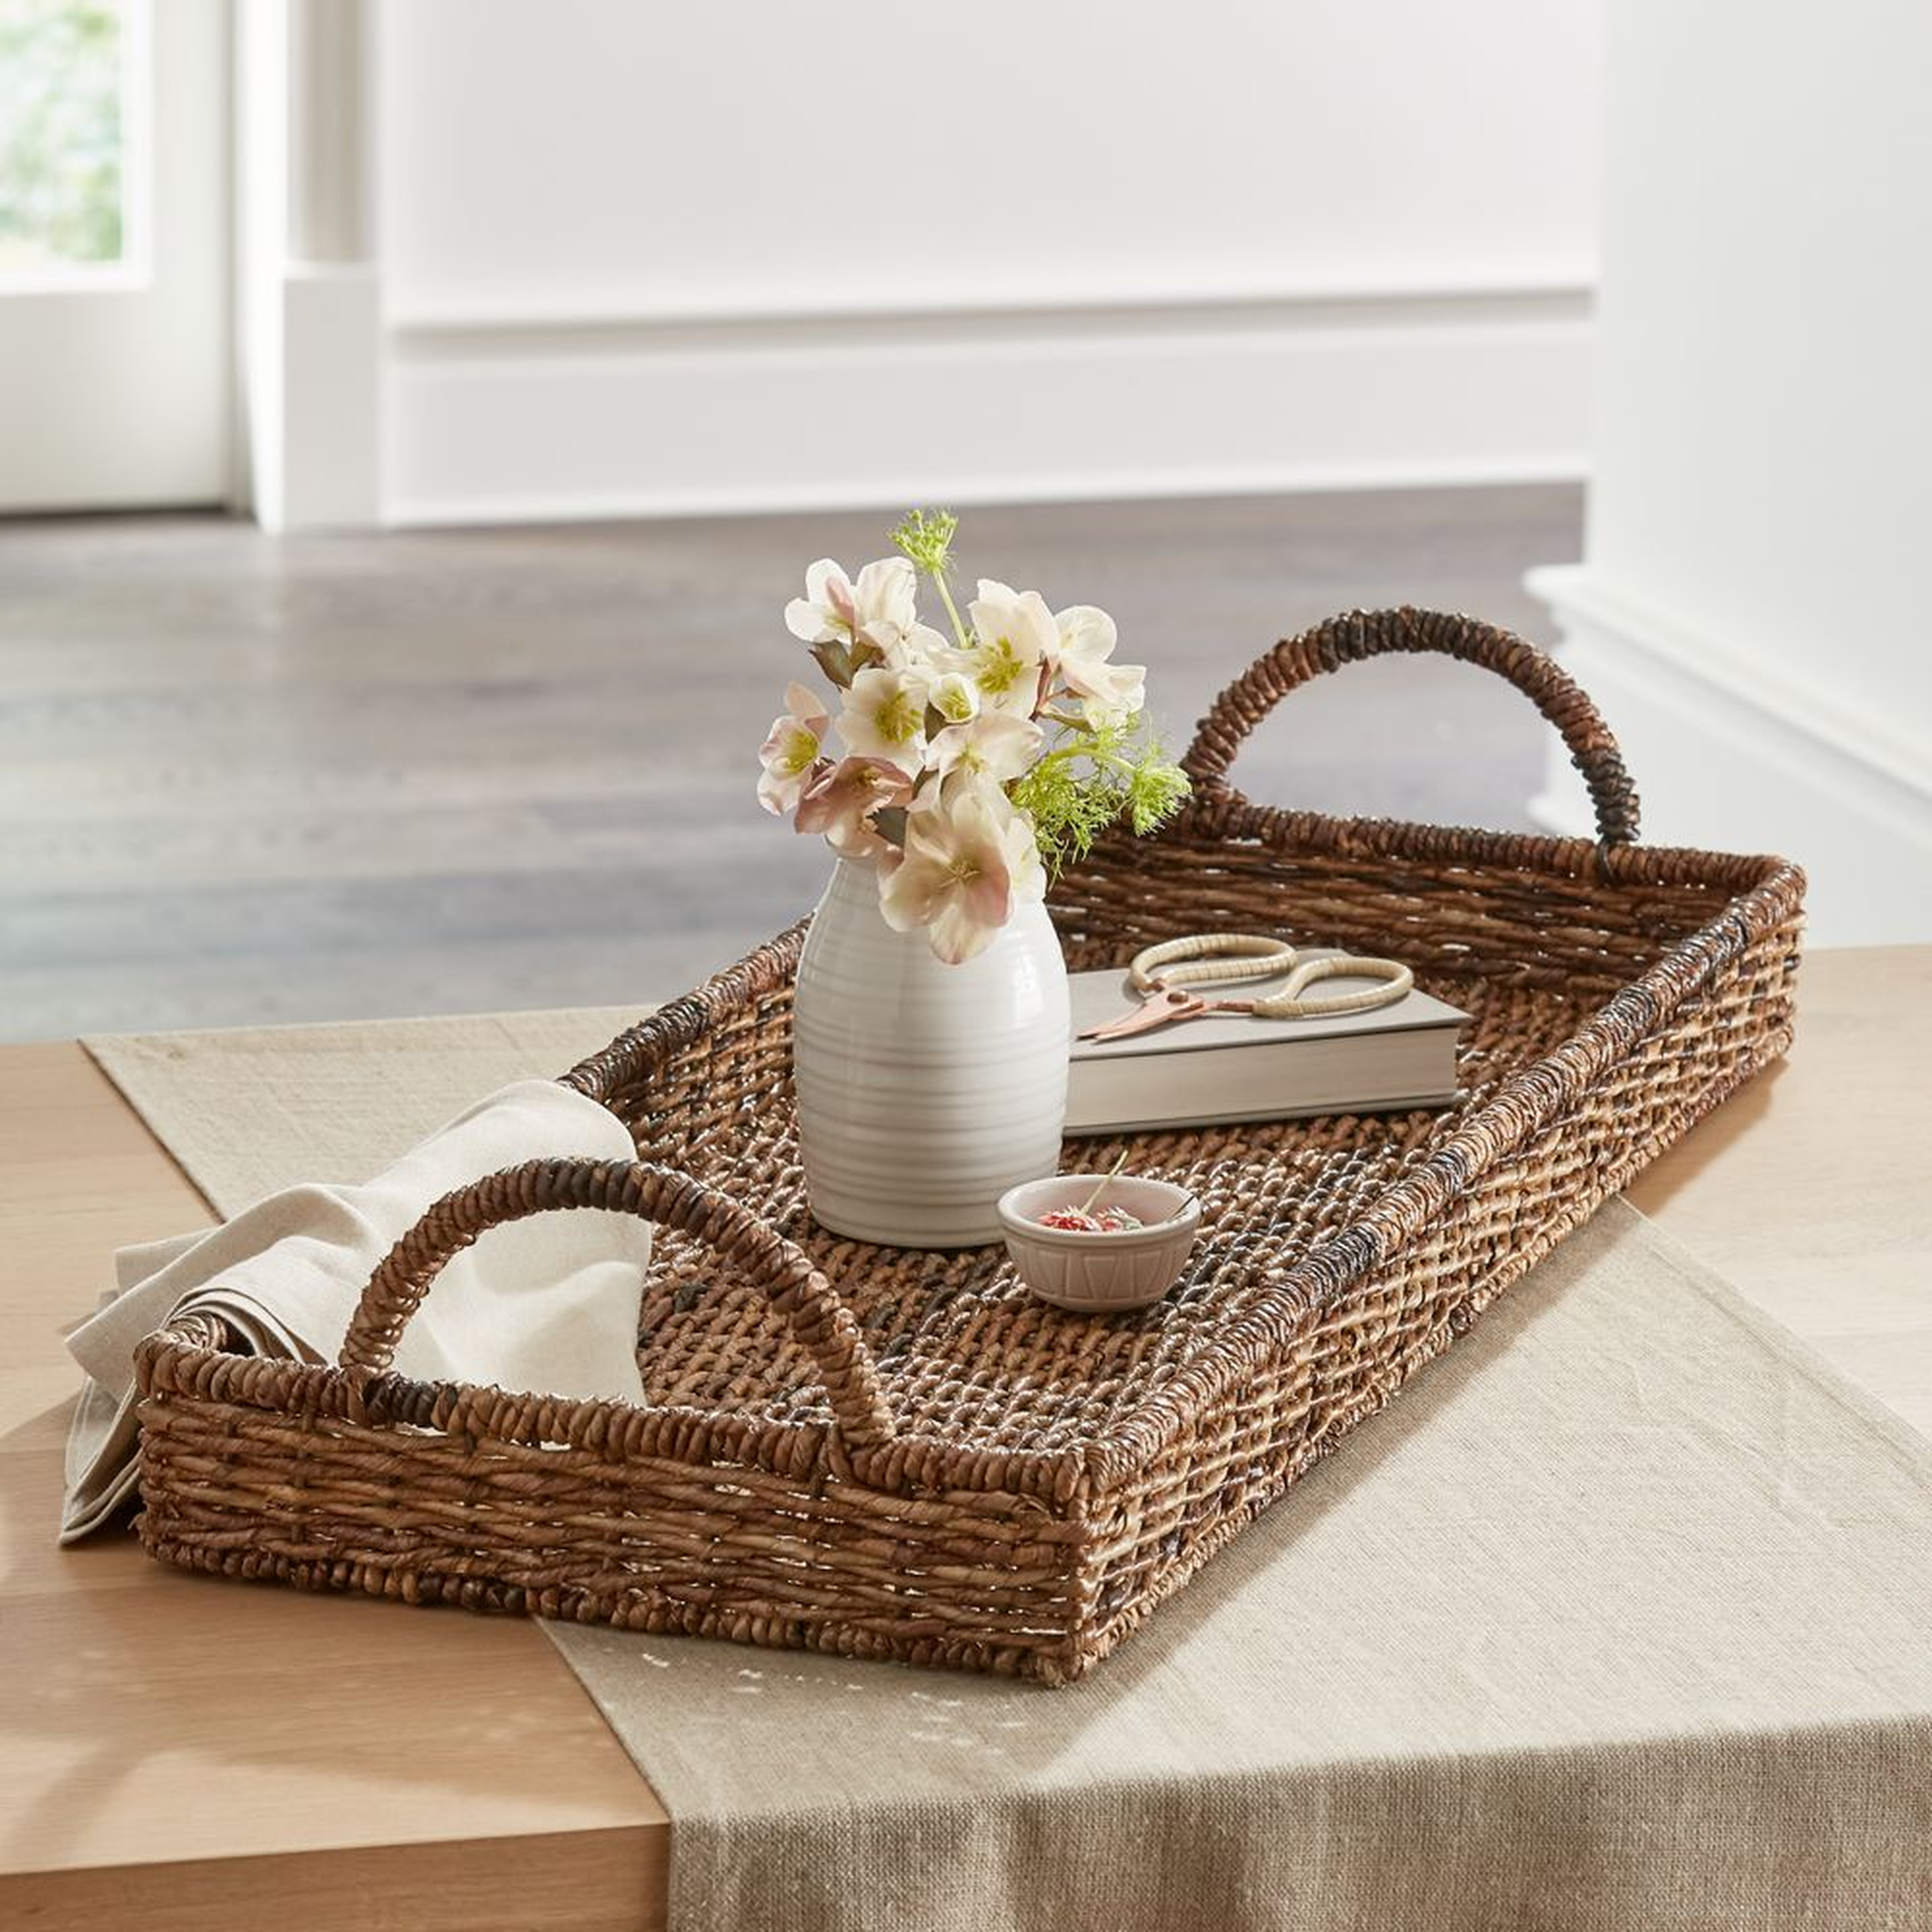 Zuzu Handwoven Long Tray - Crate and Barrel